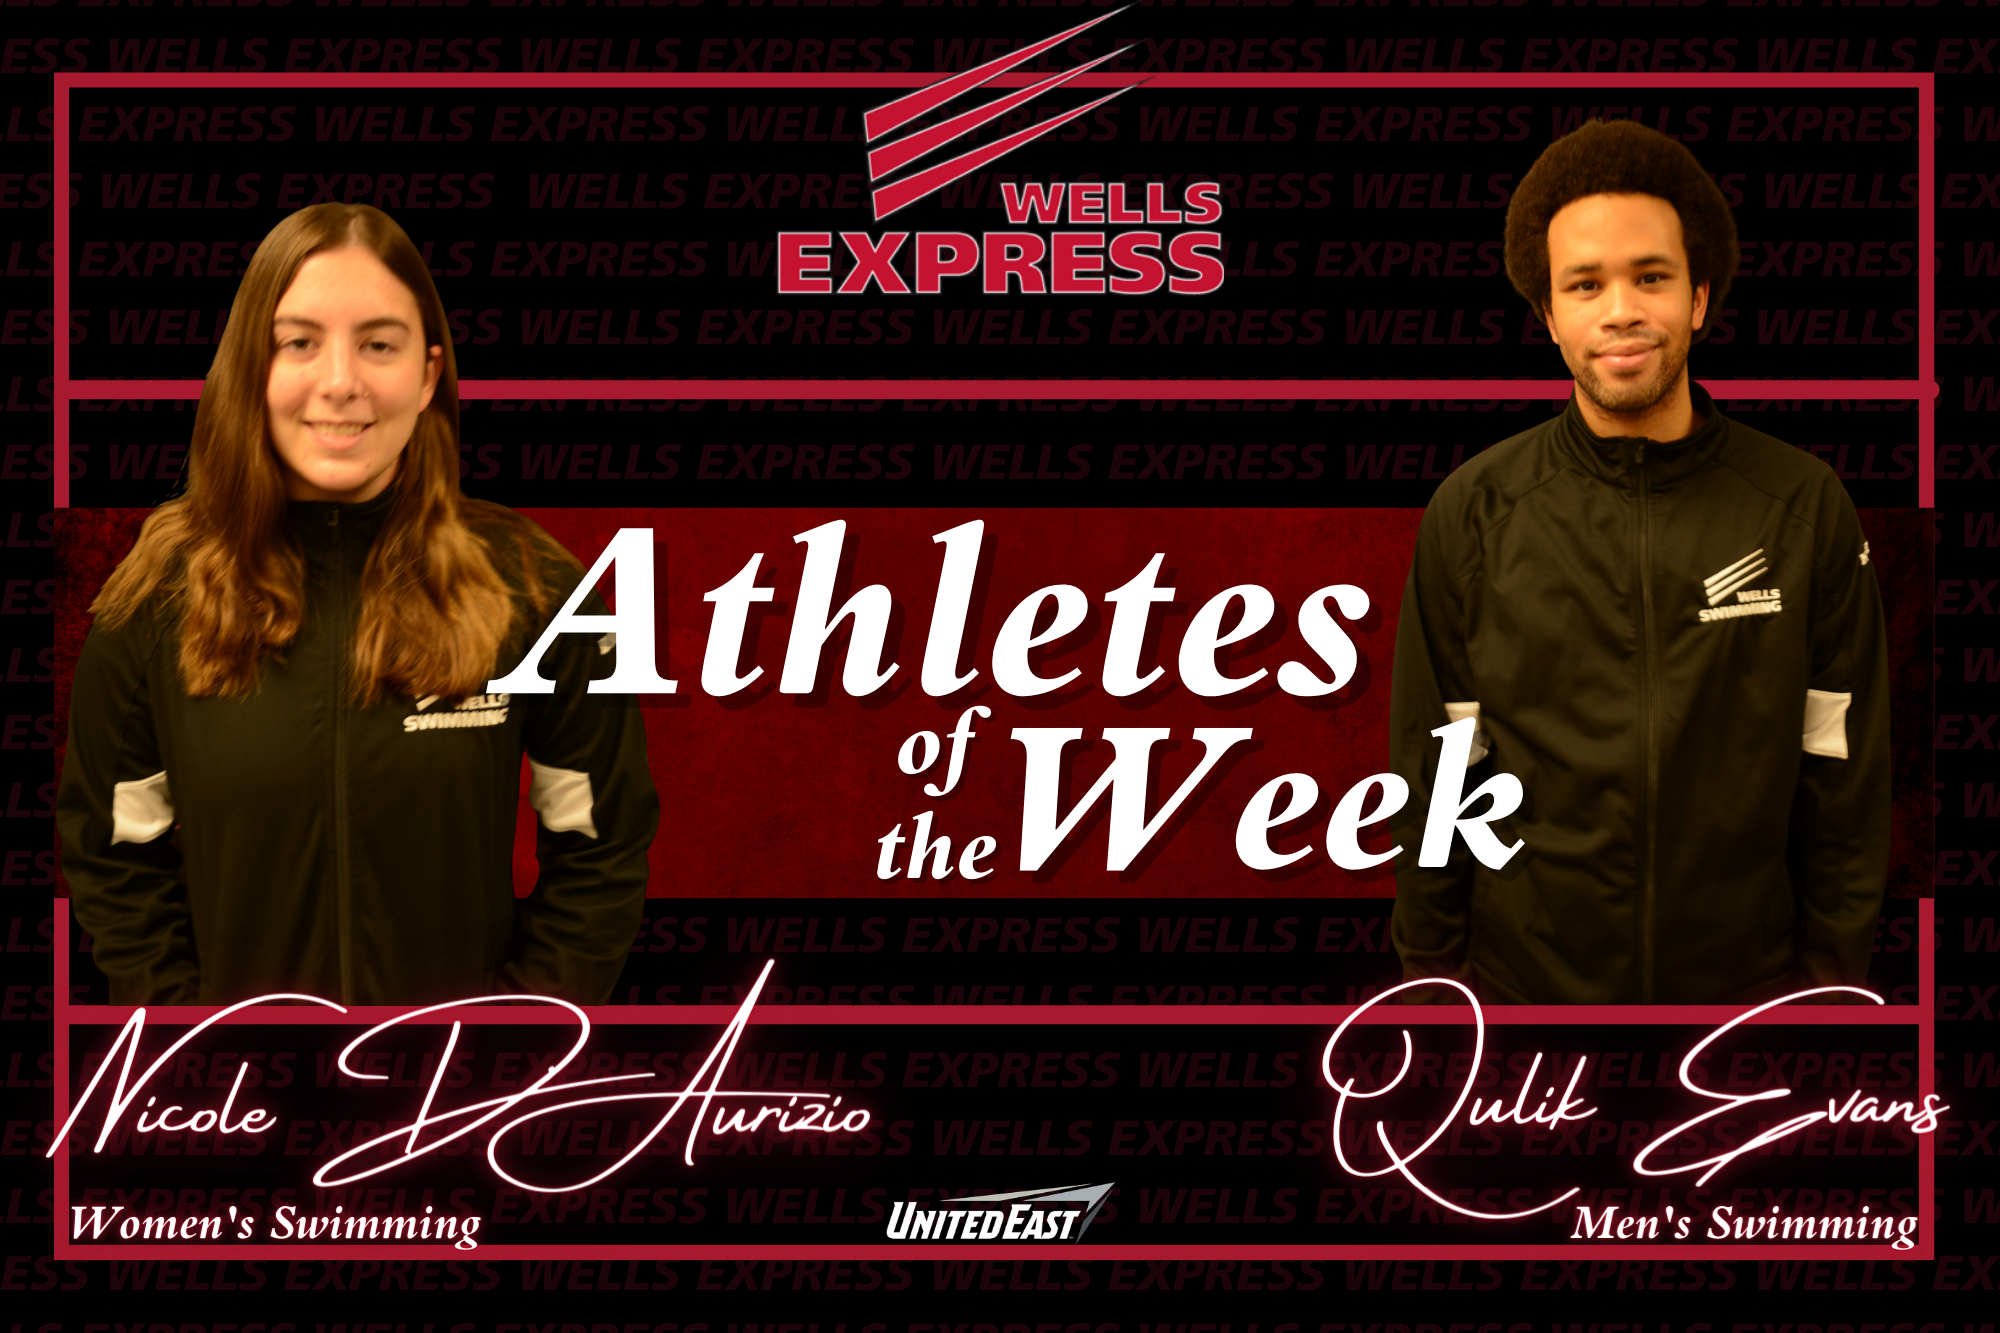 Wells Express Athletes of The Week 11/24